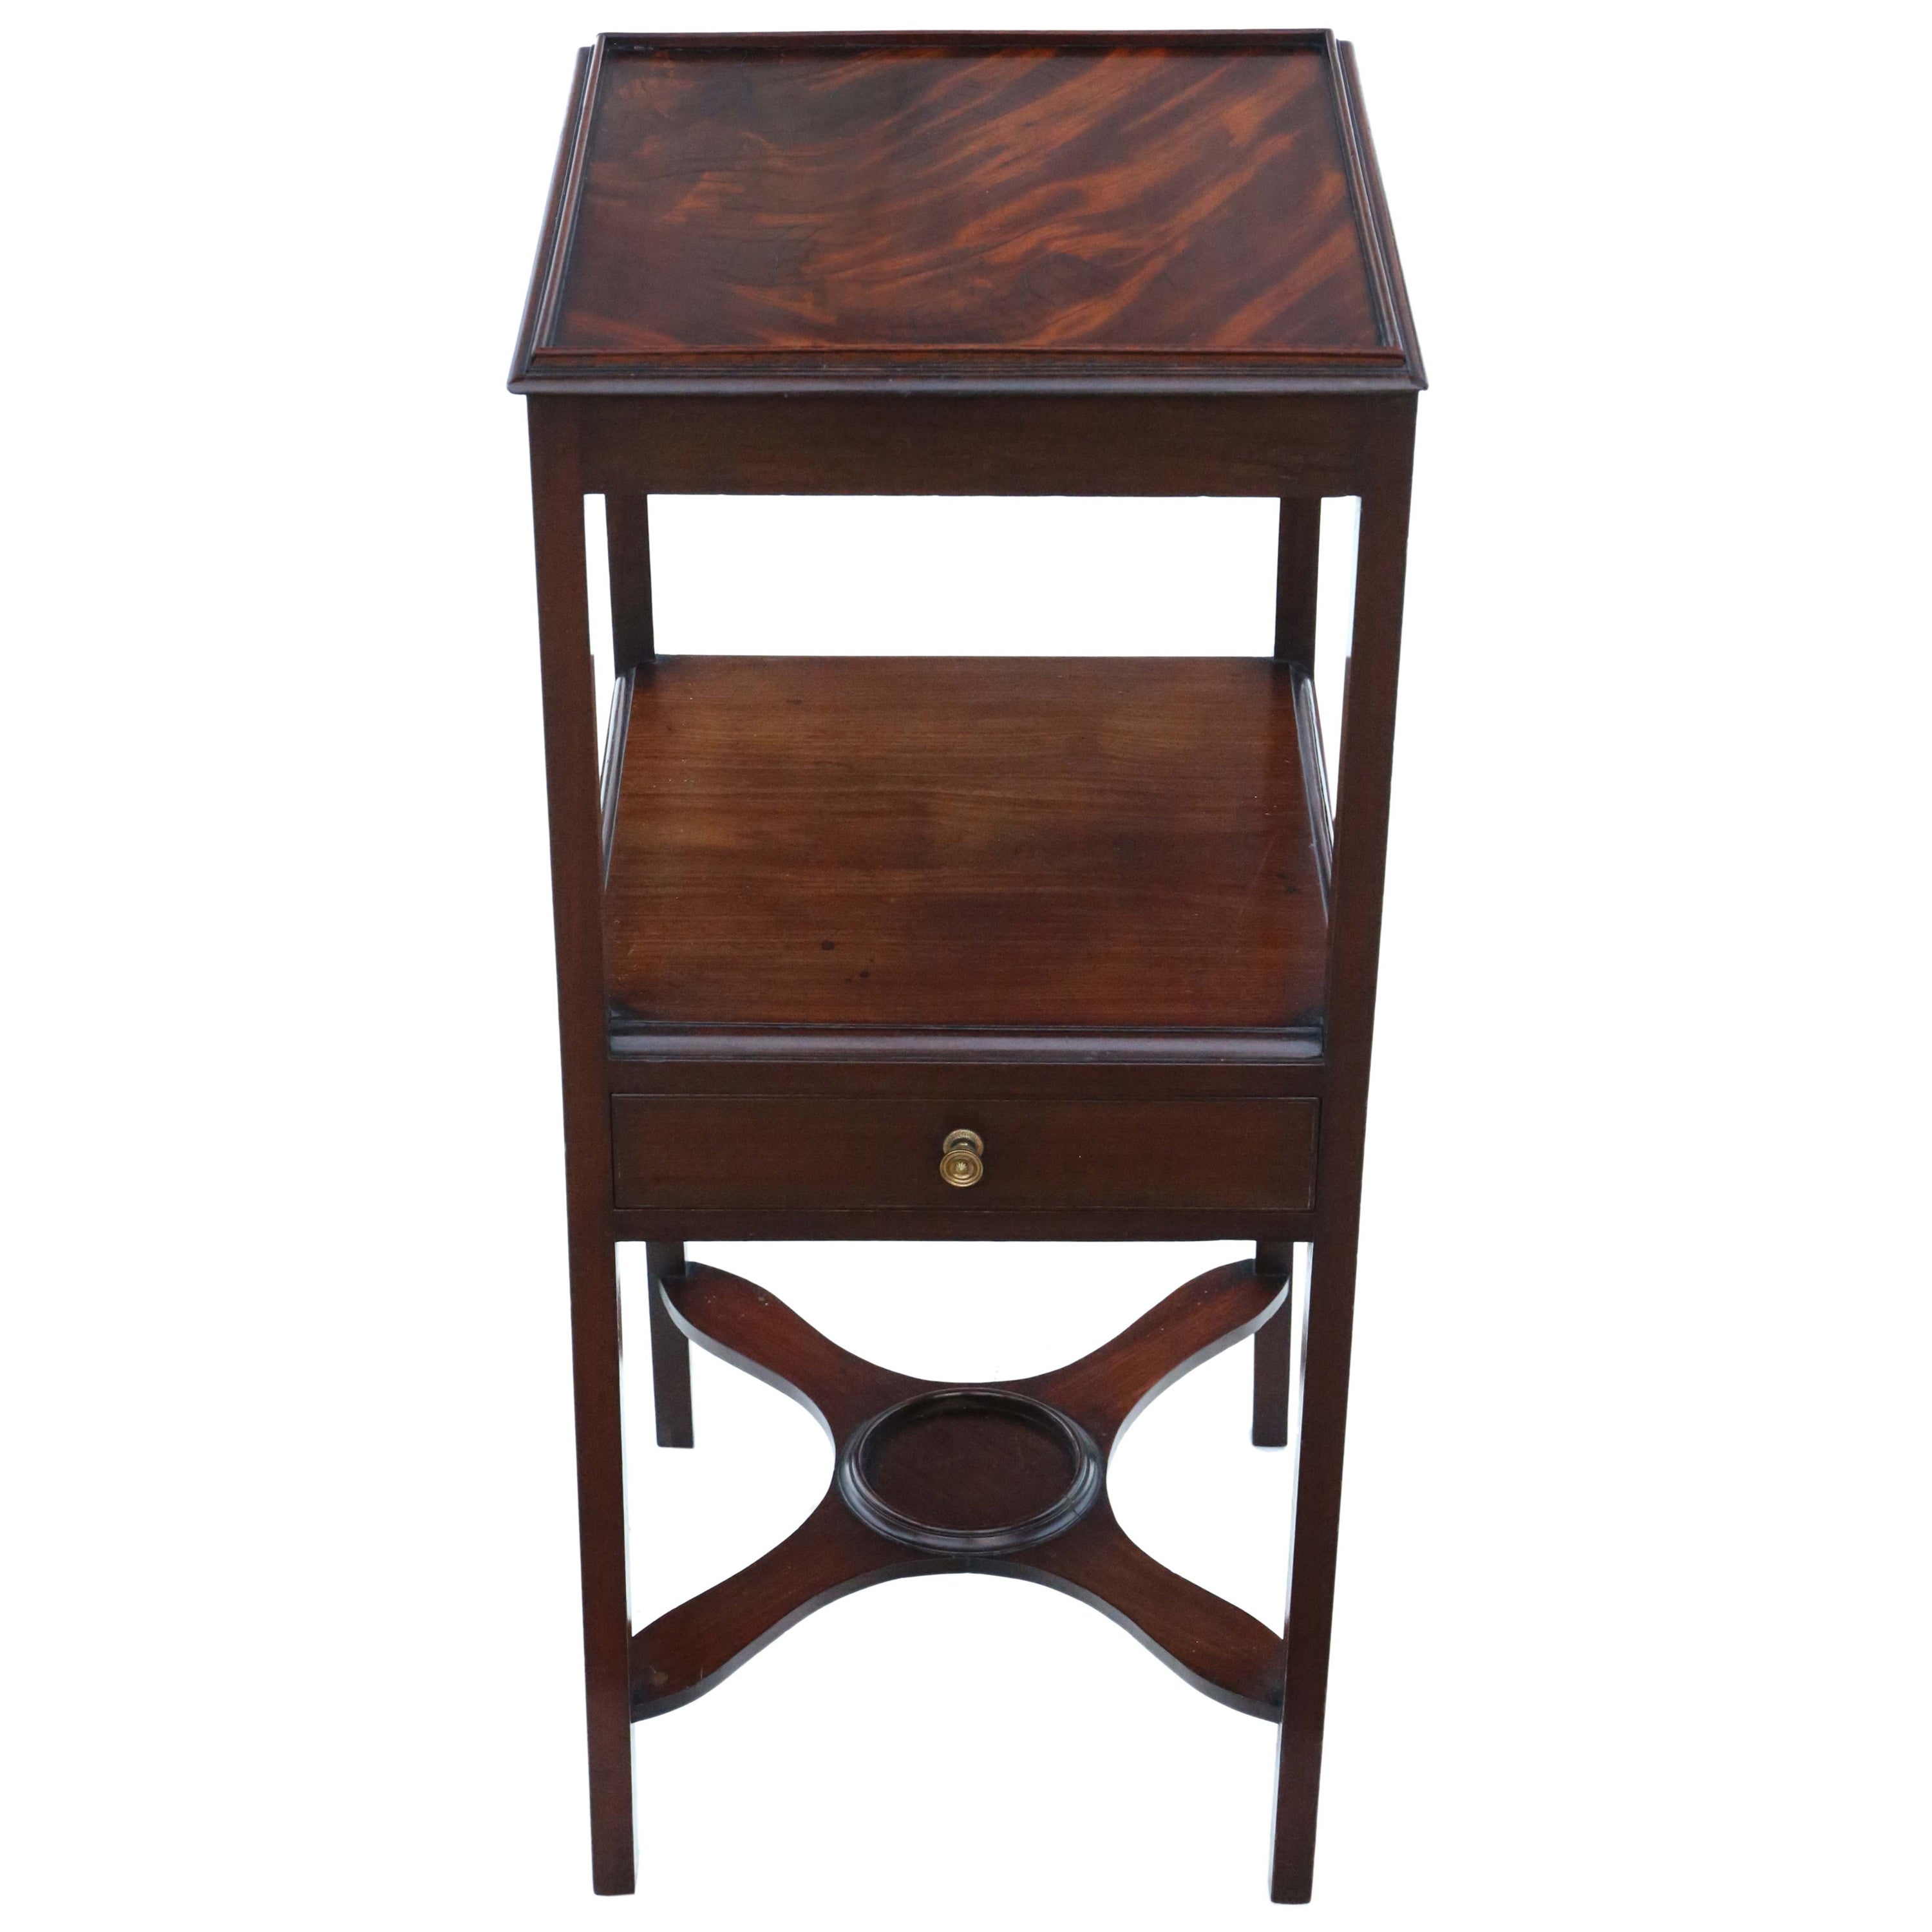  Antique quality mahogany washstand bedside table Georgian nightstand 19th C